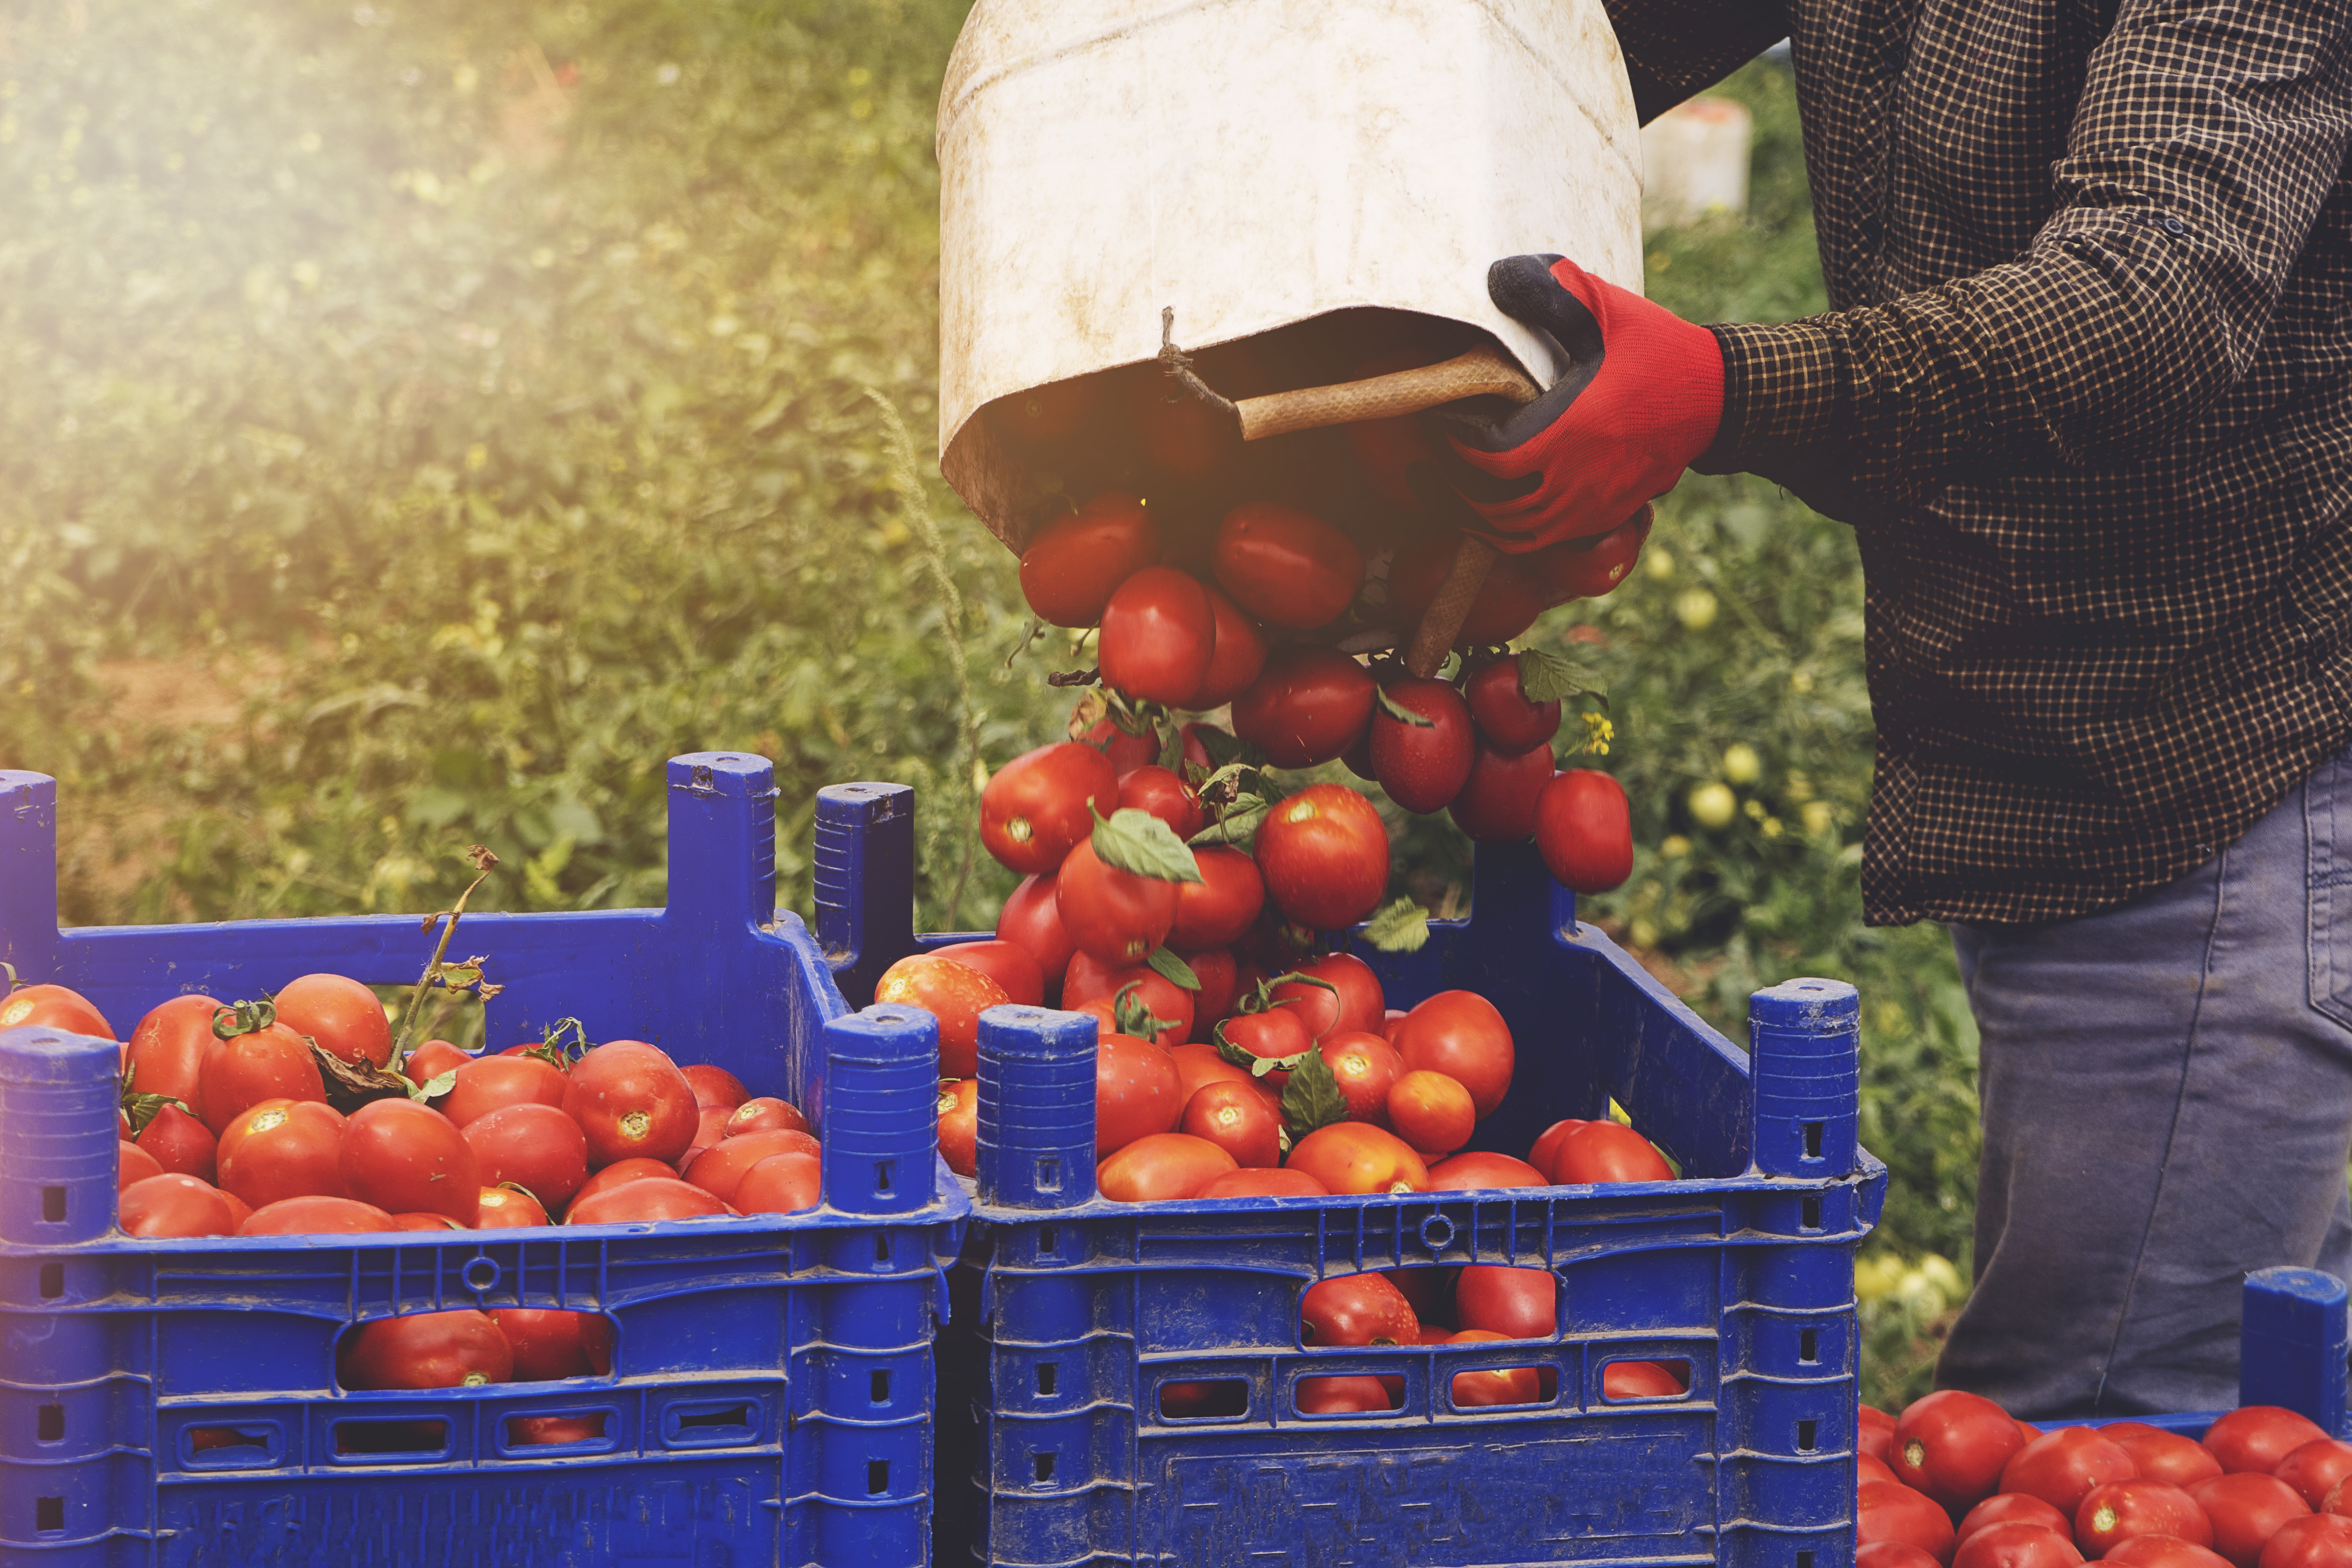 man picks a crop of tomatoes and puts them in a box in a vegetable garden. Harvesting in the field, organic products